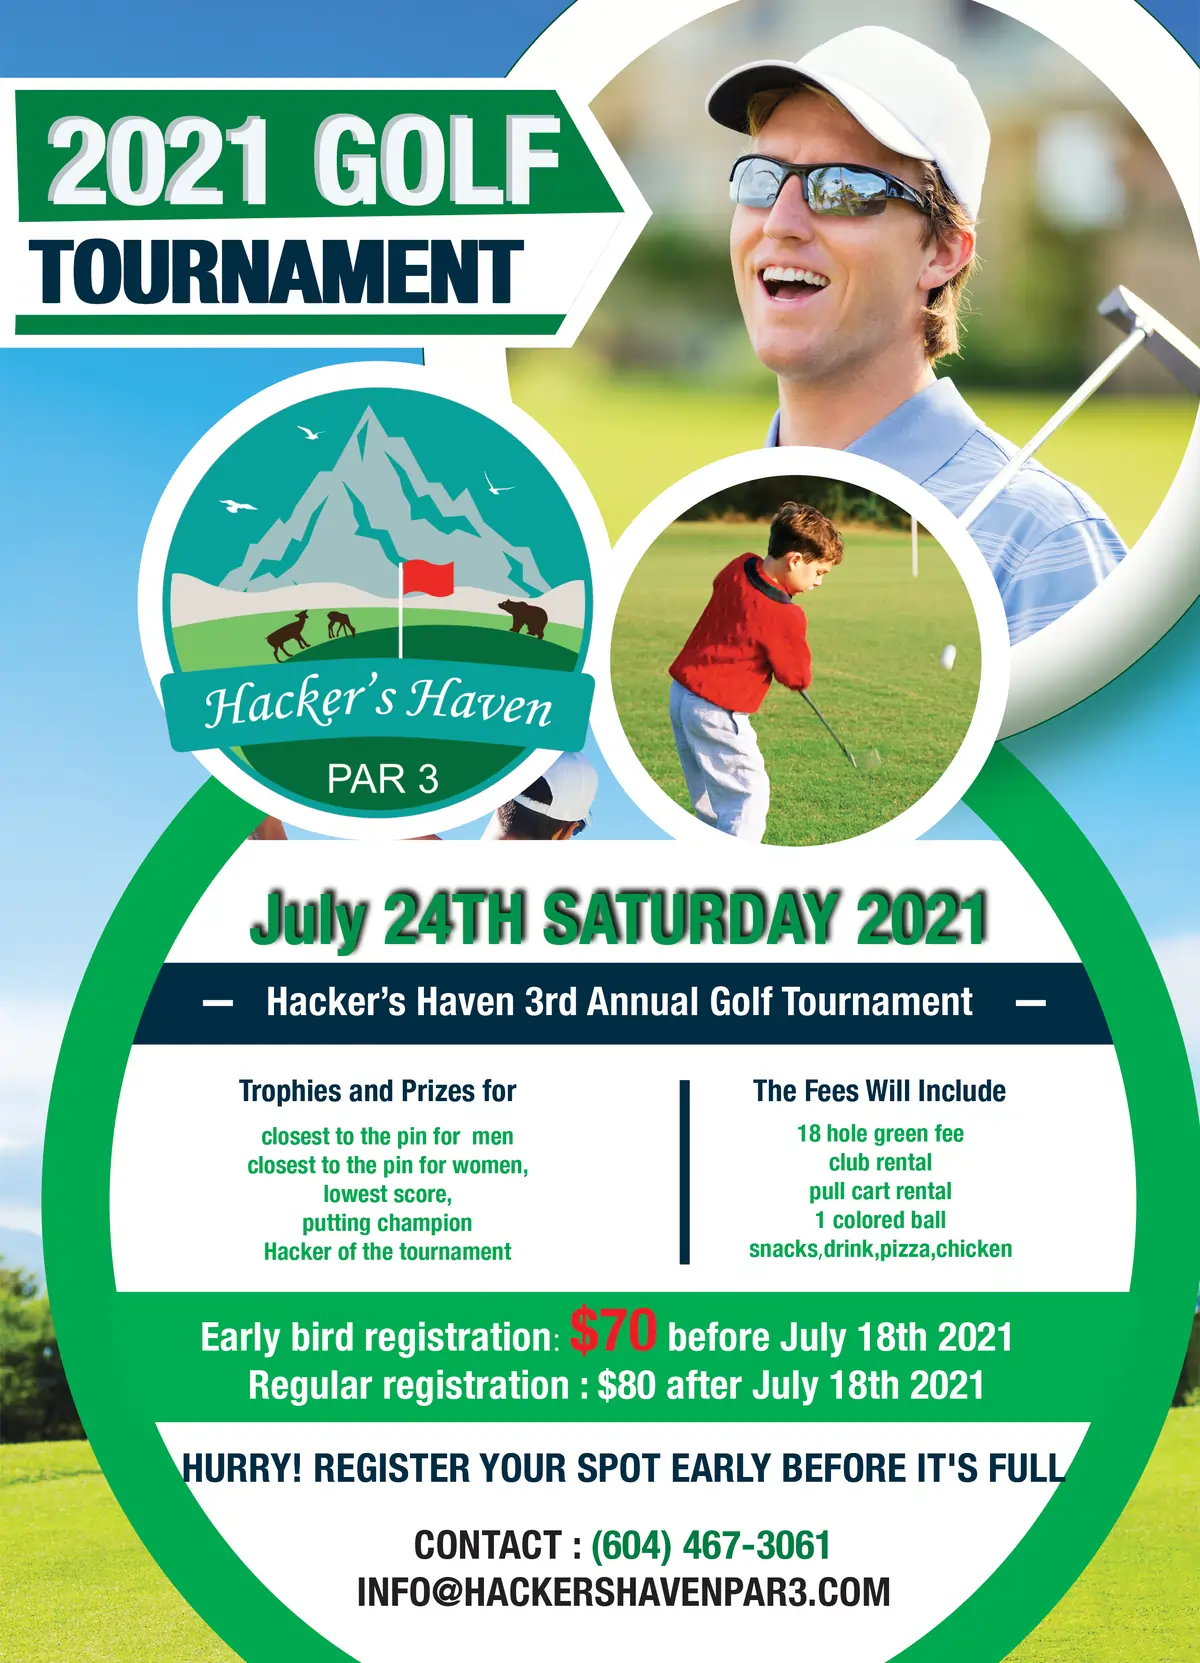 Hacker’s Haven Annual Golf Tournament poster